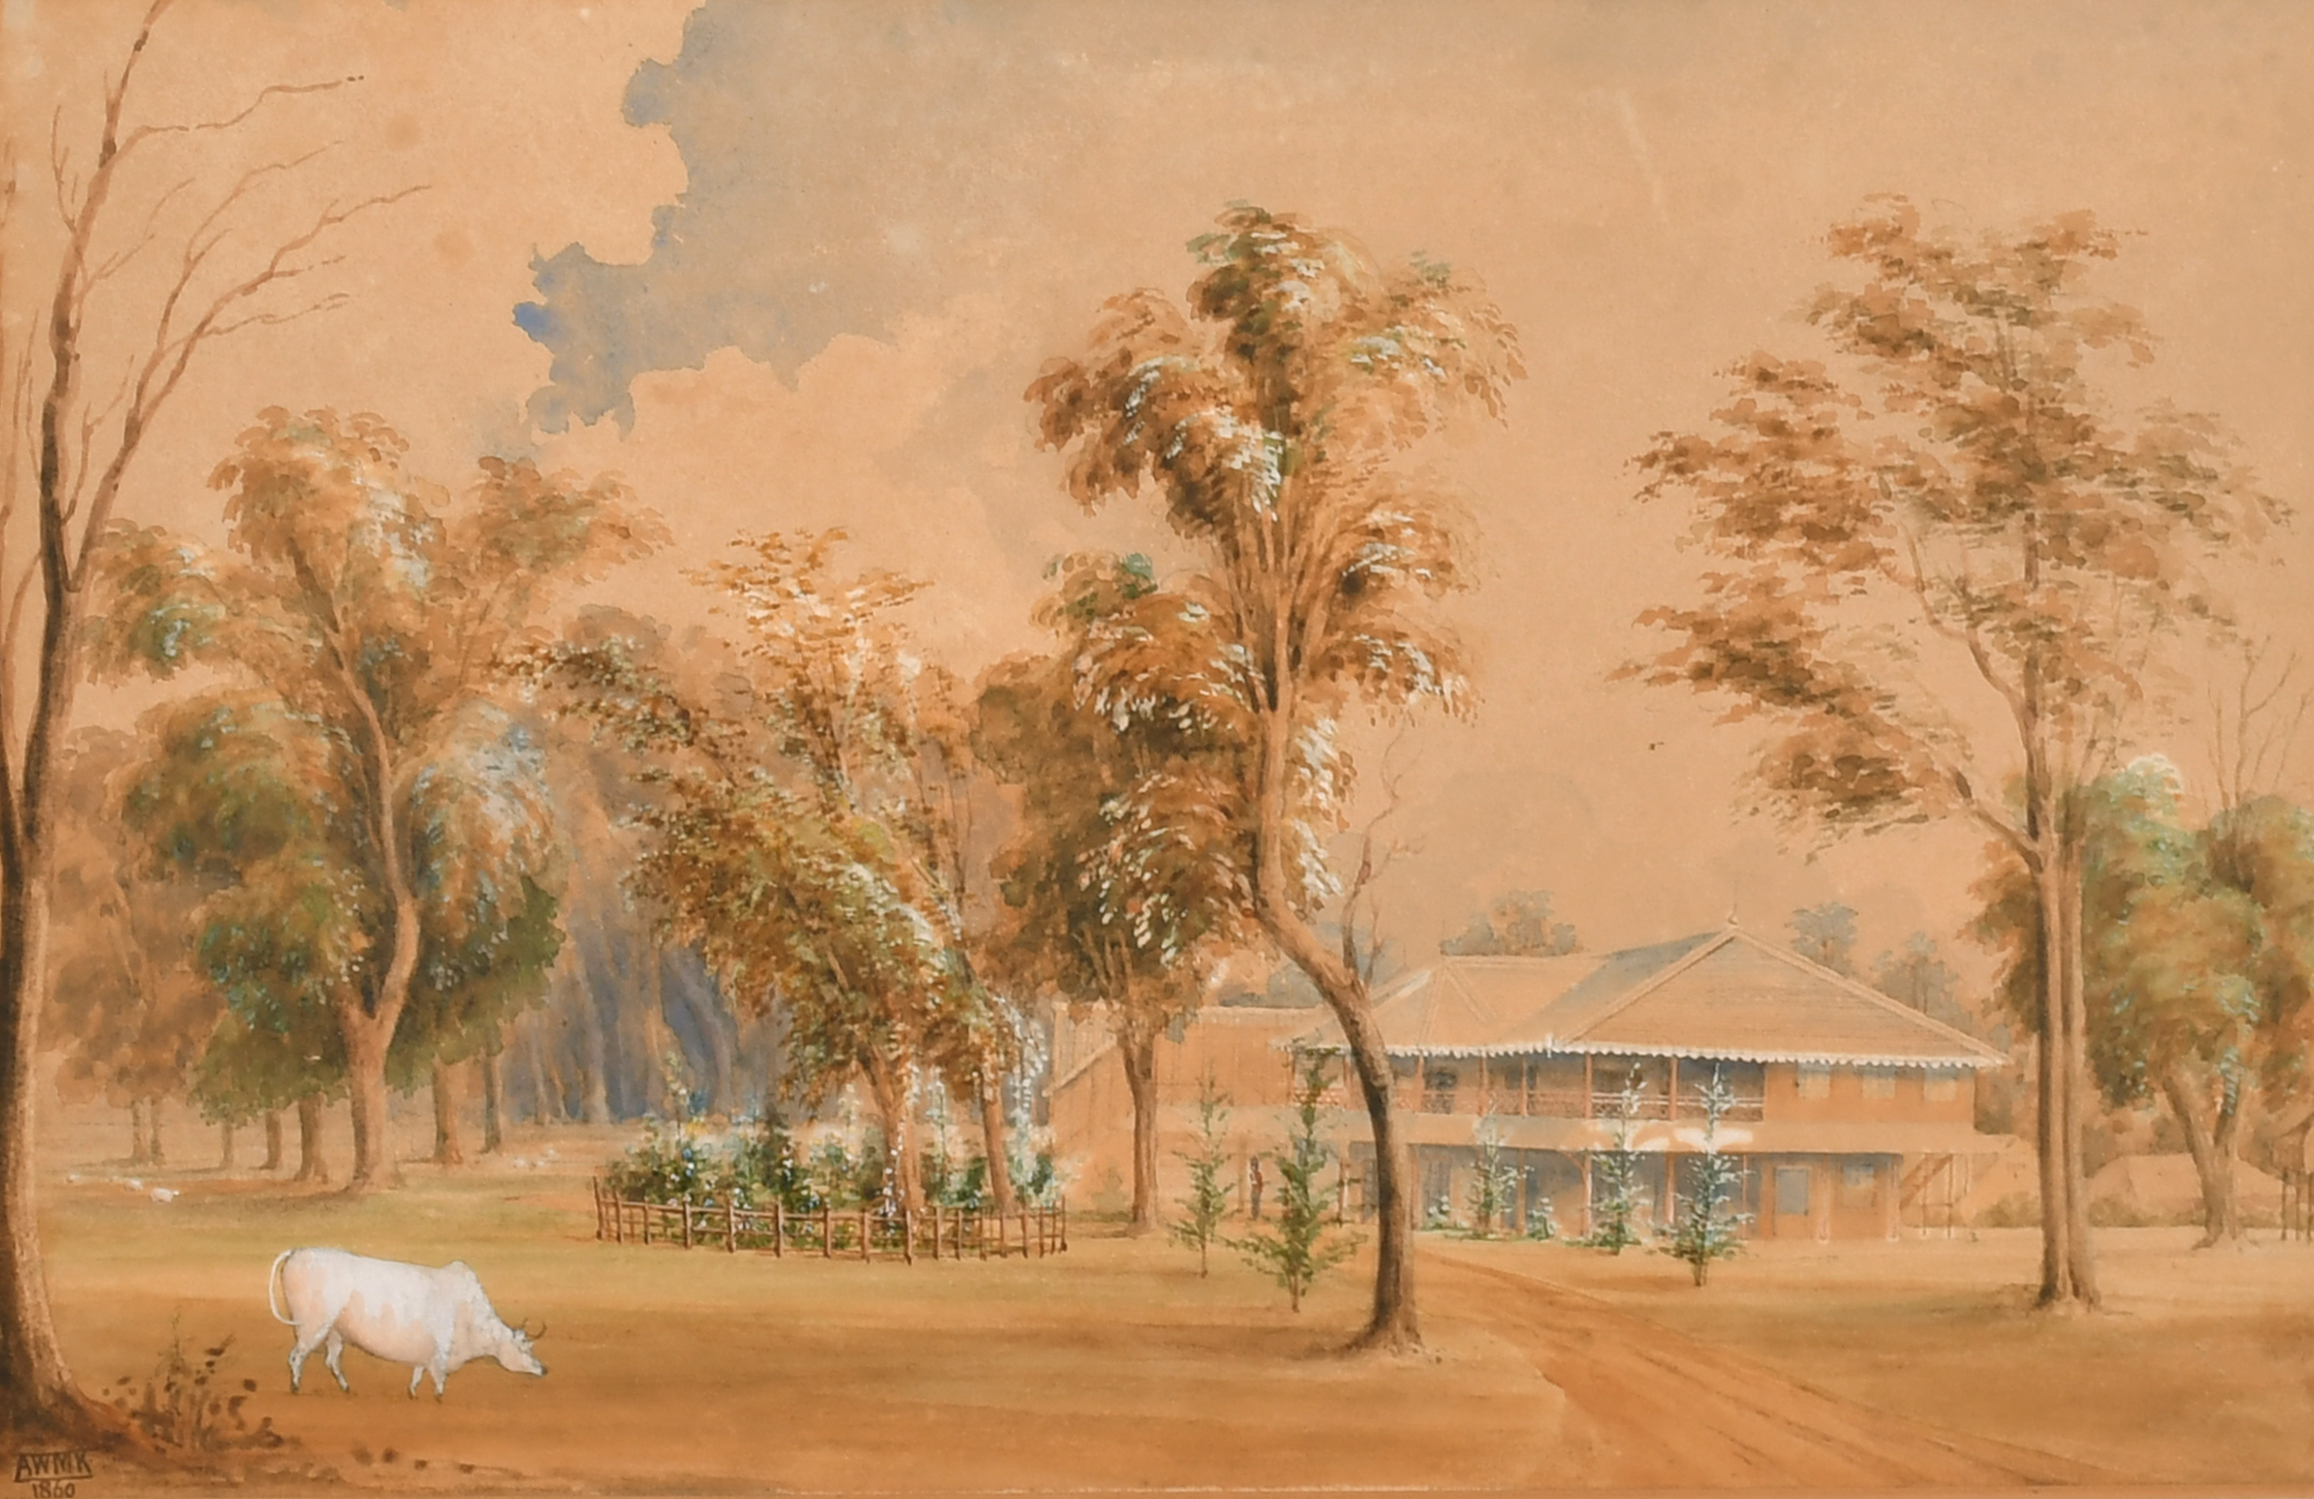 A W M K (19th Century) British. A Topographical Landscape with a Distant House, Watercolour, - Image 2 of 7